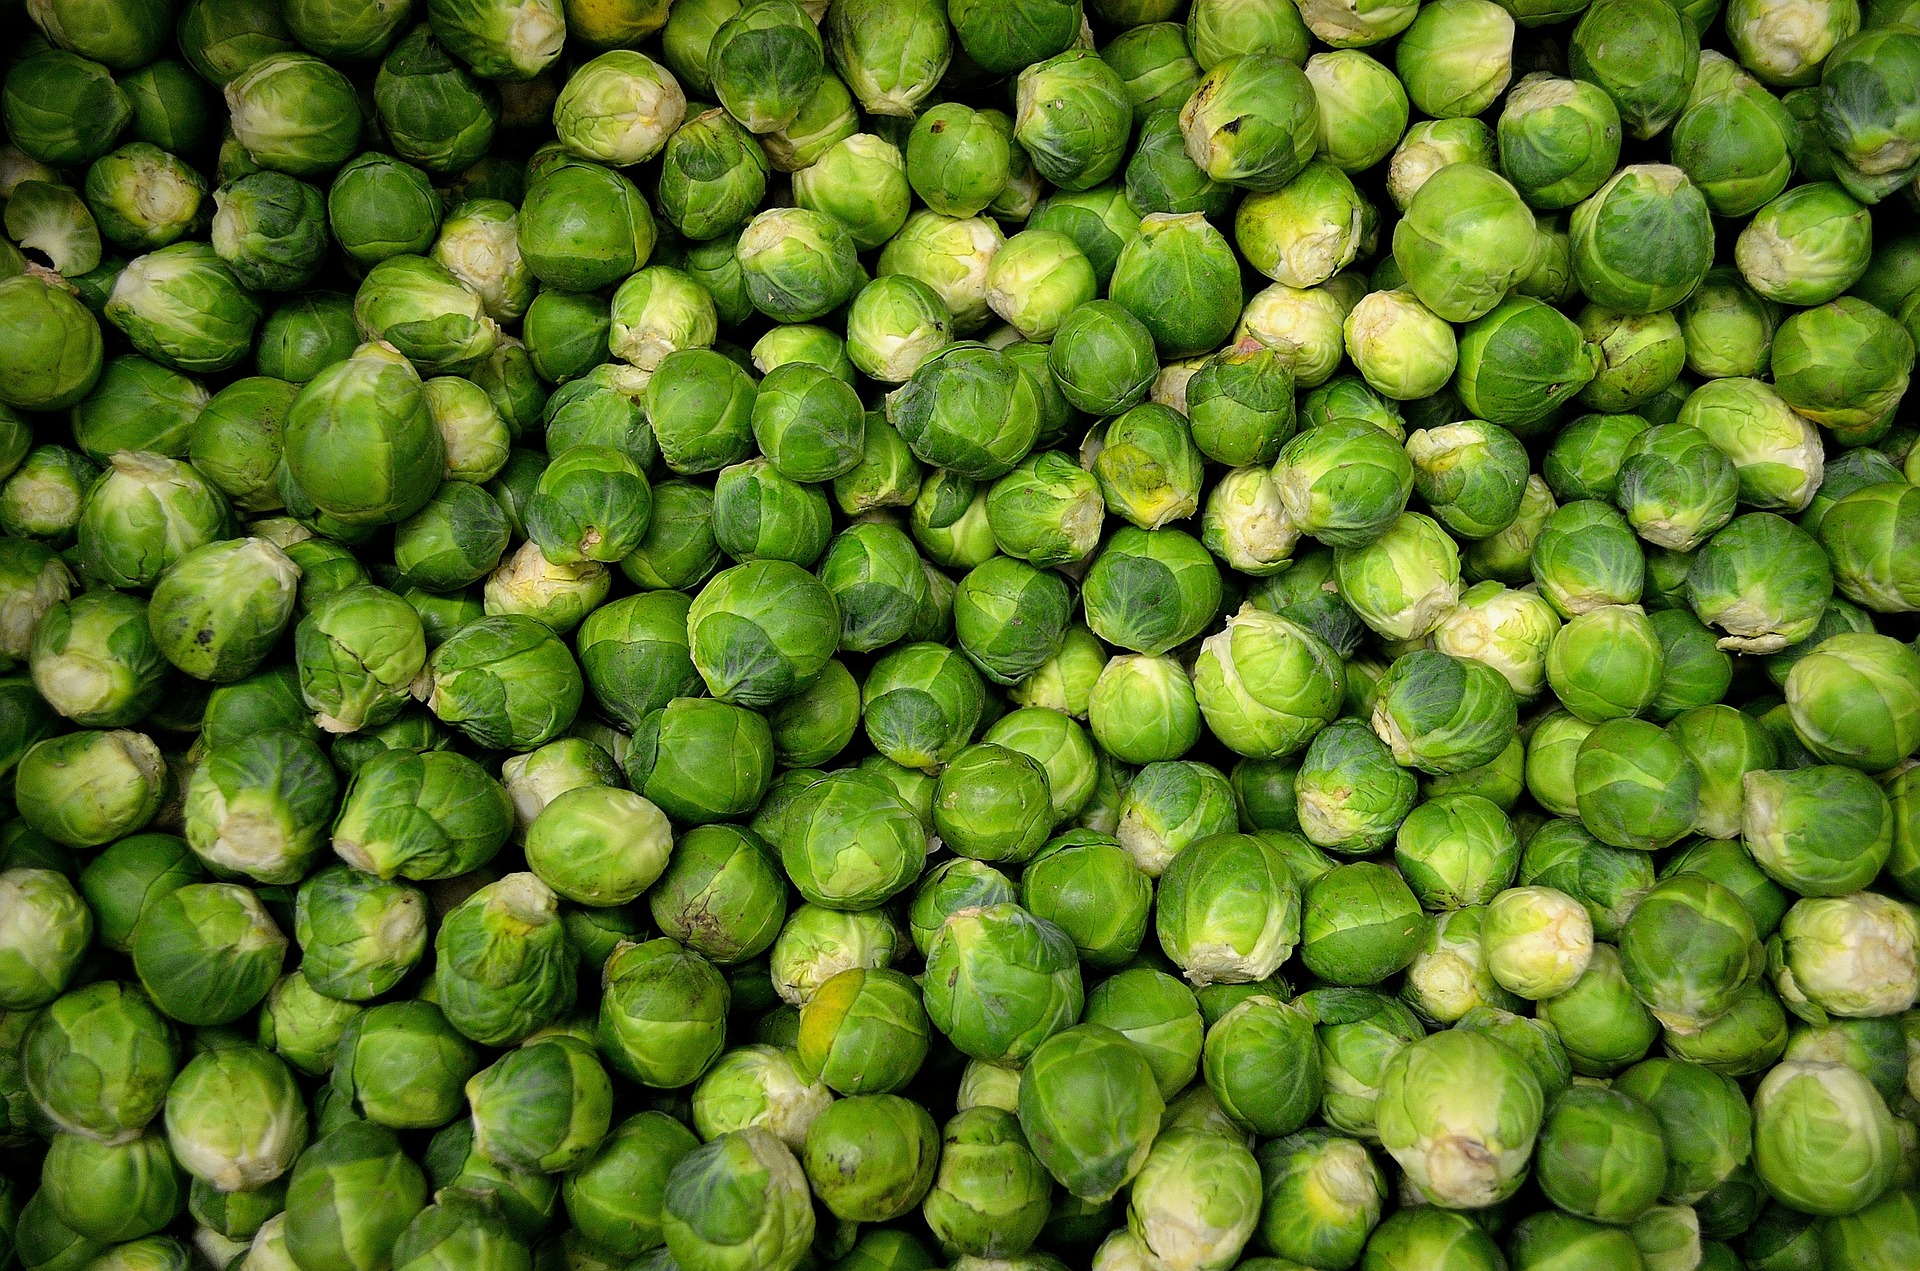 brussels-sprouts-22009_1920